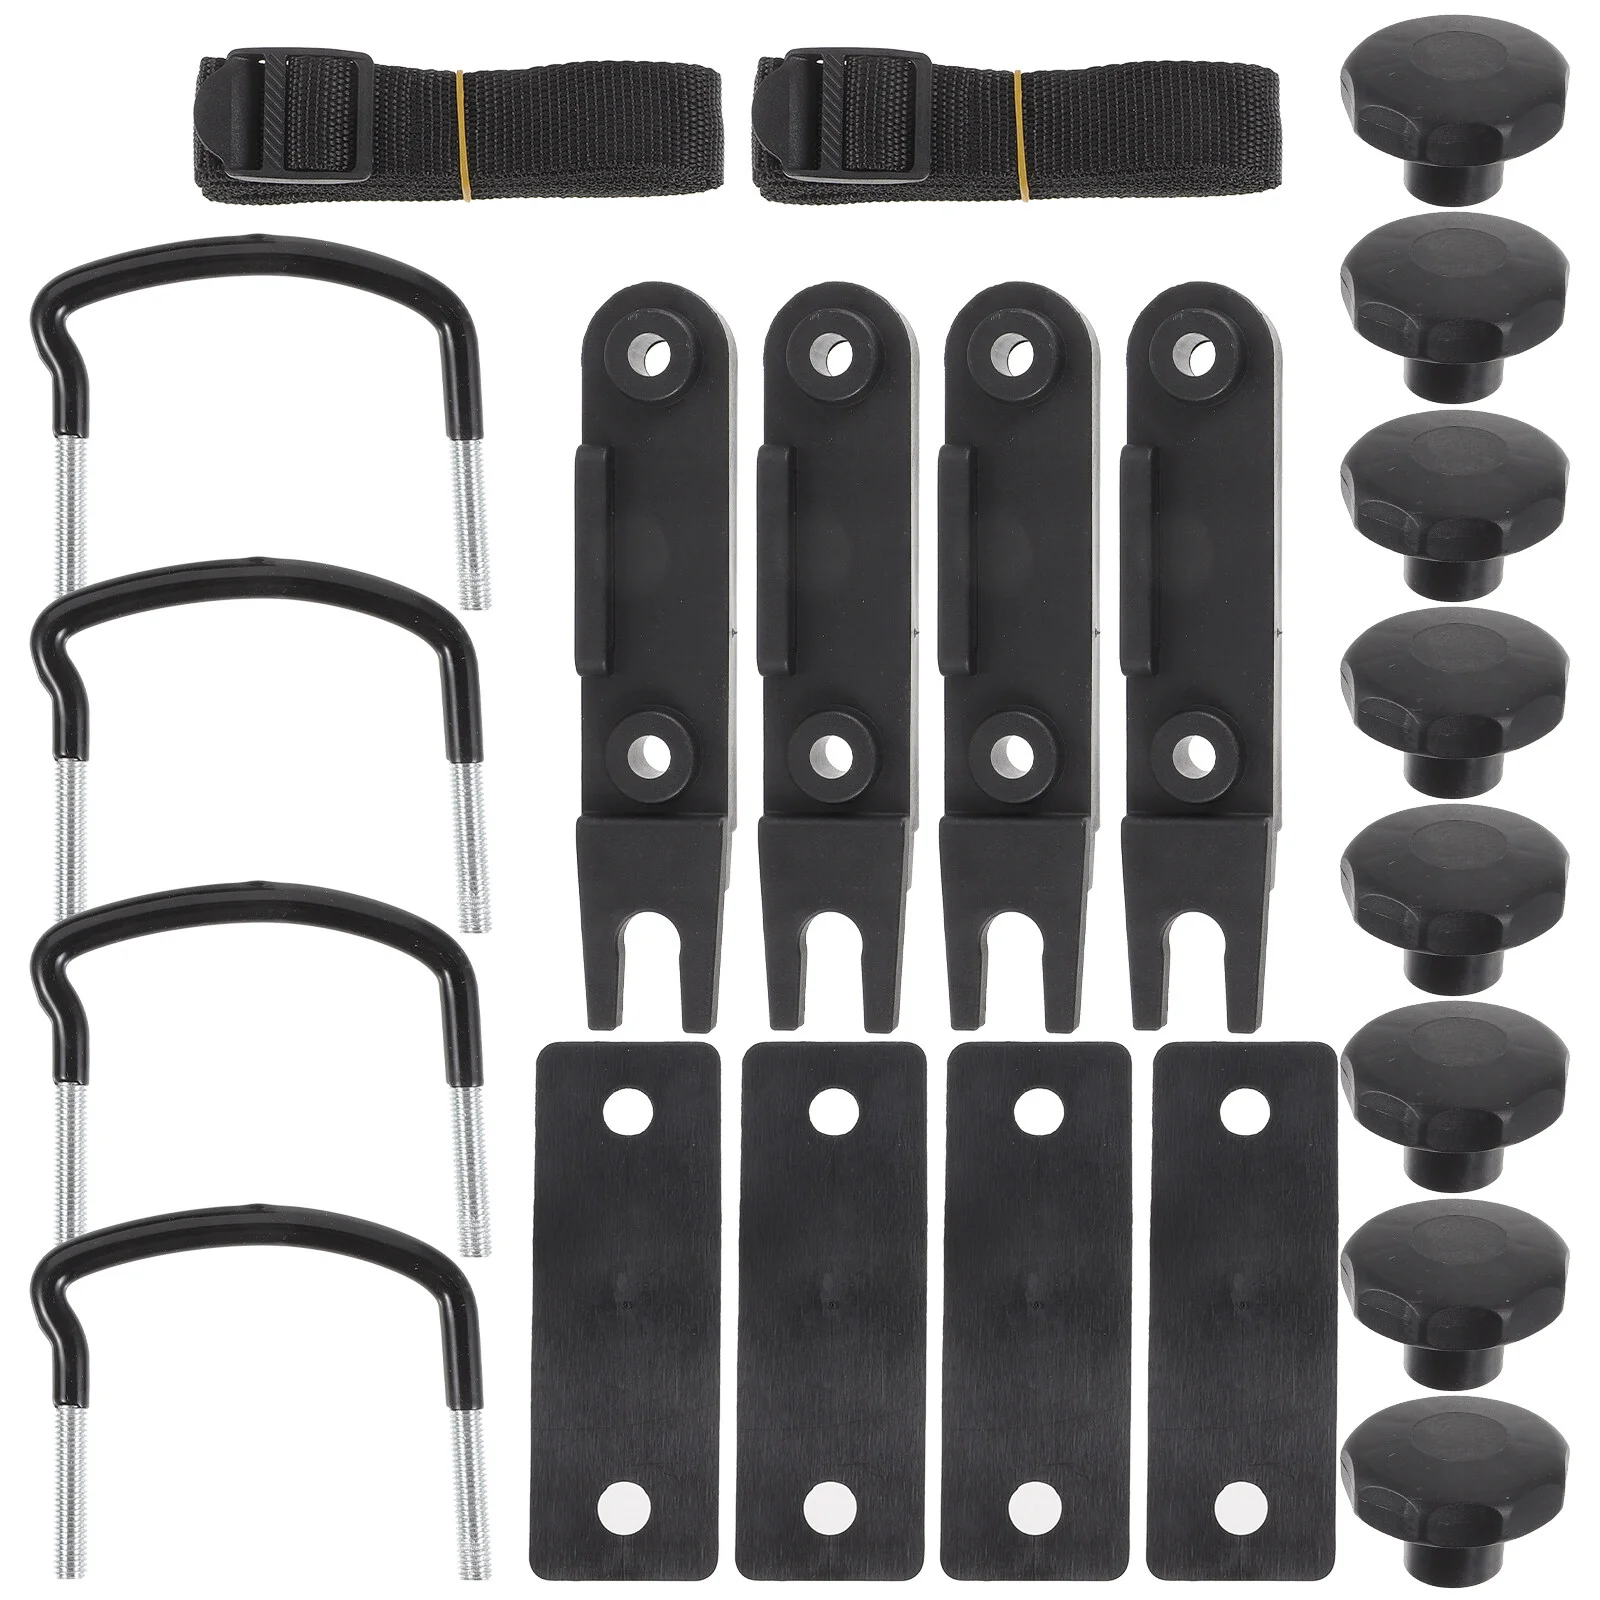 

Top Shelf Cargo Carrier Rack Bolts Mounting Fitting Kit Rooftop Luggage Brackets Accessories Lock Nuts Dedicated Clips